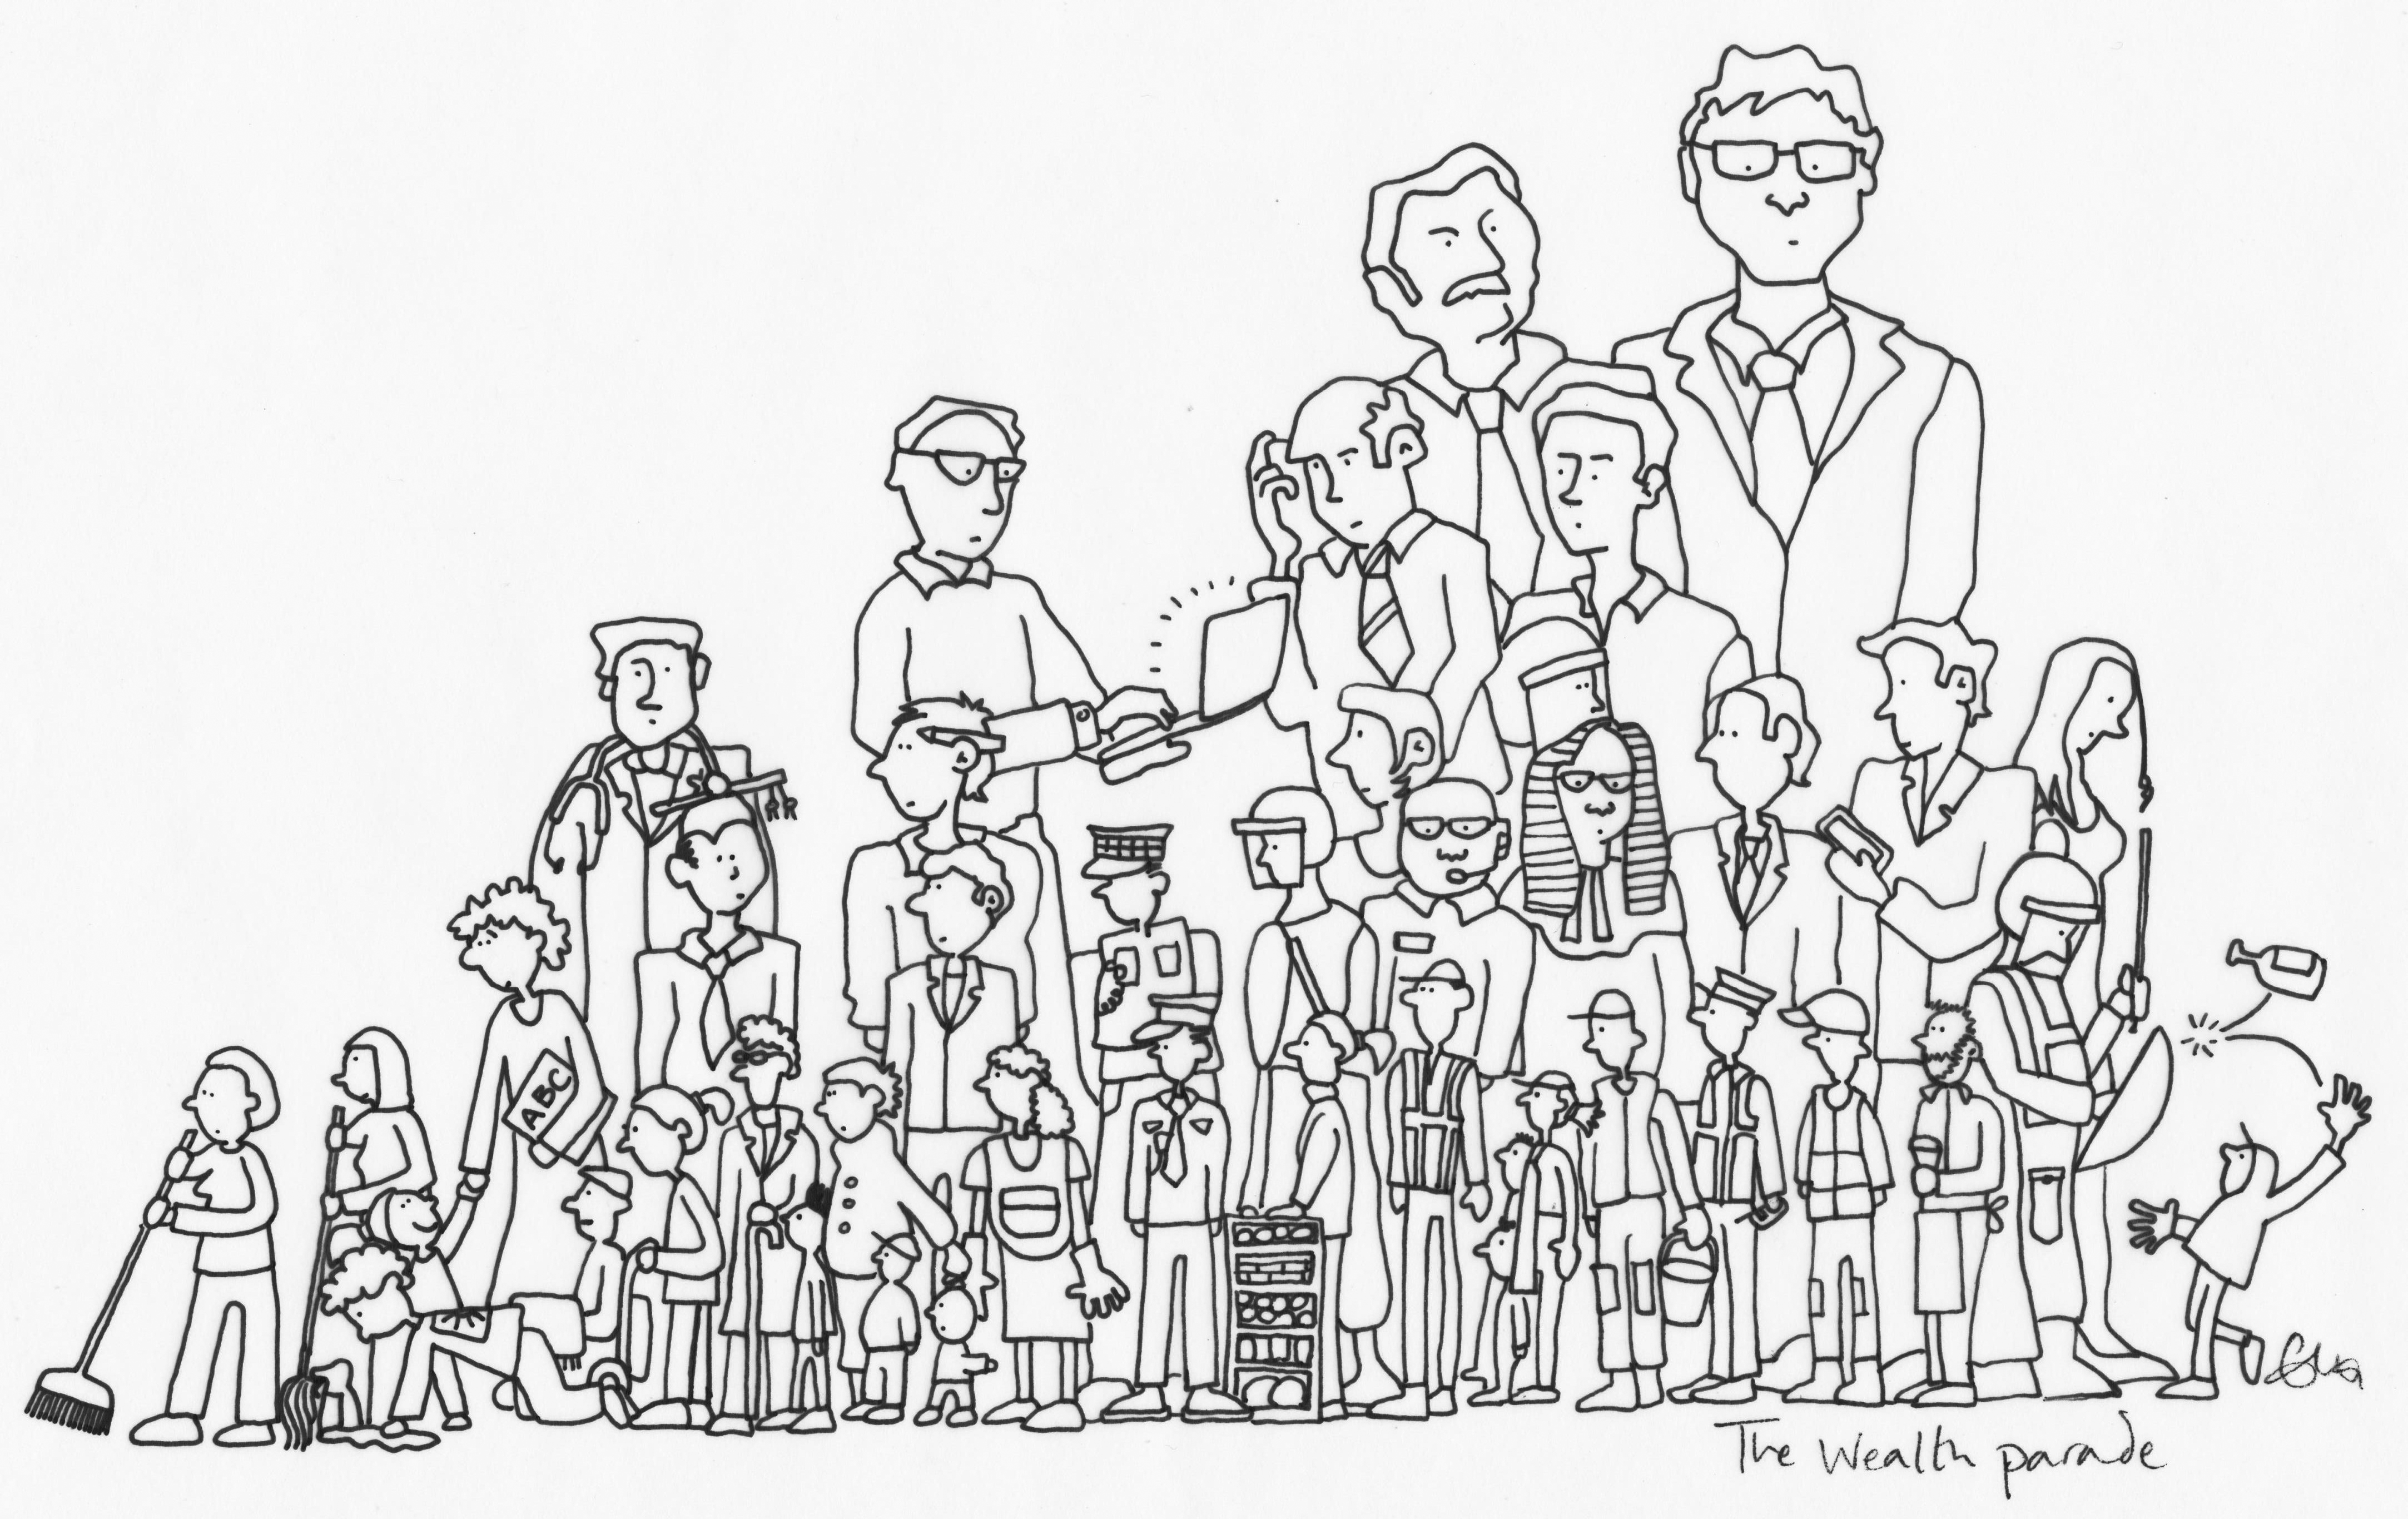 Figure 5.0: “The wealth parade” drawn by Ella Furness in 2016 and reproduced here with kind permission. Ella is currently working as a Research Associate (Cyswllt Ymchwil) in the Sustainable Places Research Institute (Sefydliad Ymchwil Mannau Cynaliadwy) at the University of Cardiff, in Wales (Prifysgol Caerdydd). This is one of many illustrations she drew for ‘A Better Politics’ (Dorling, 2016).